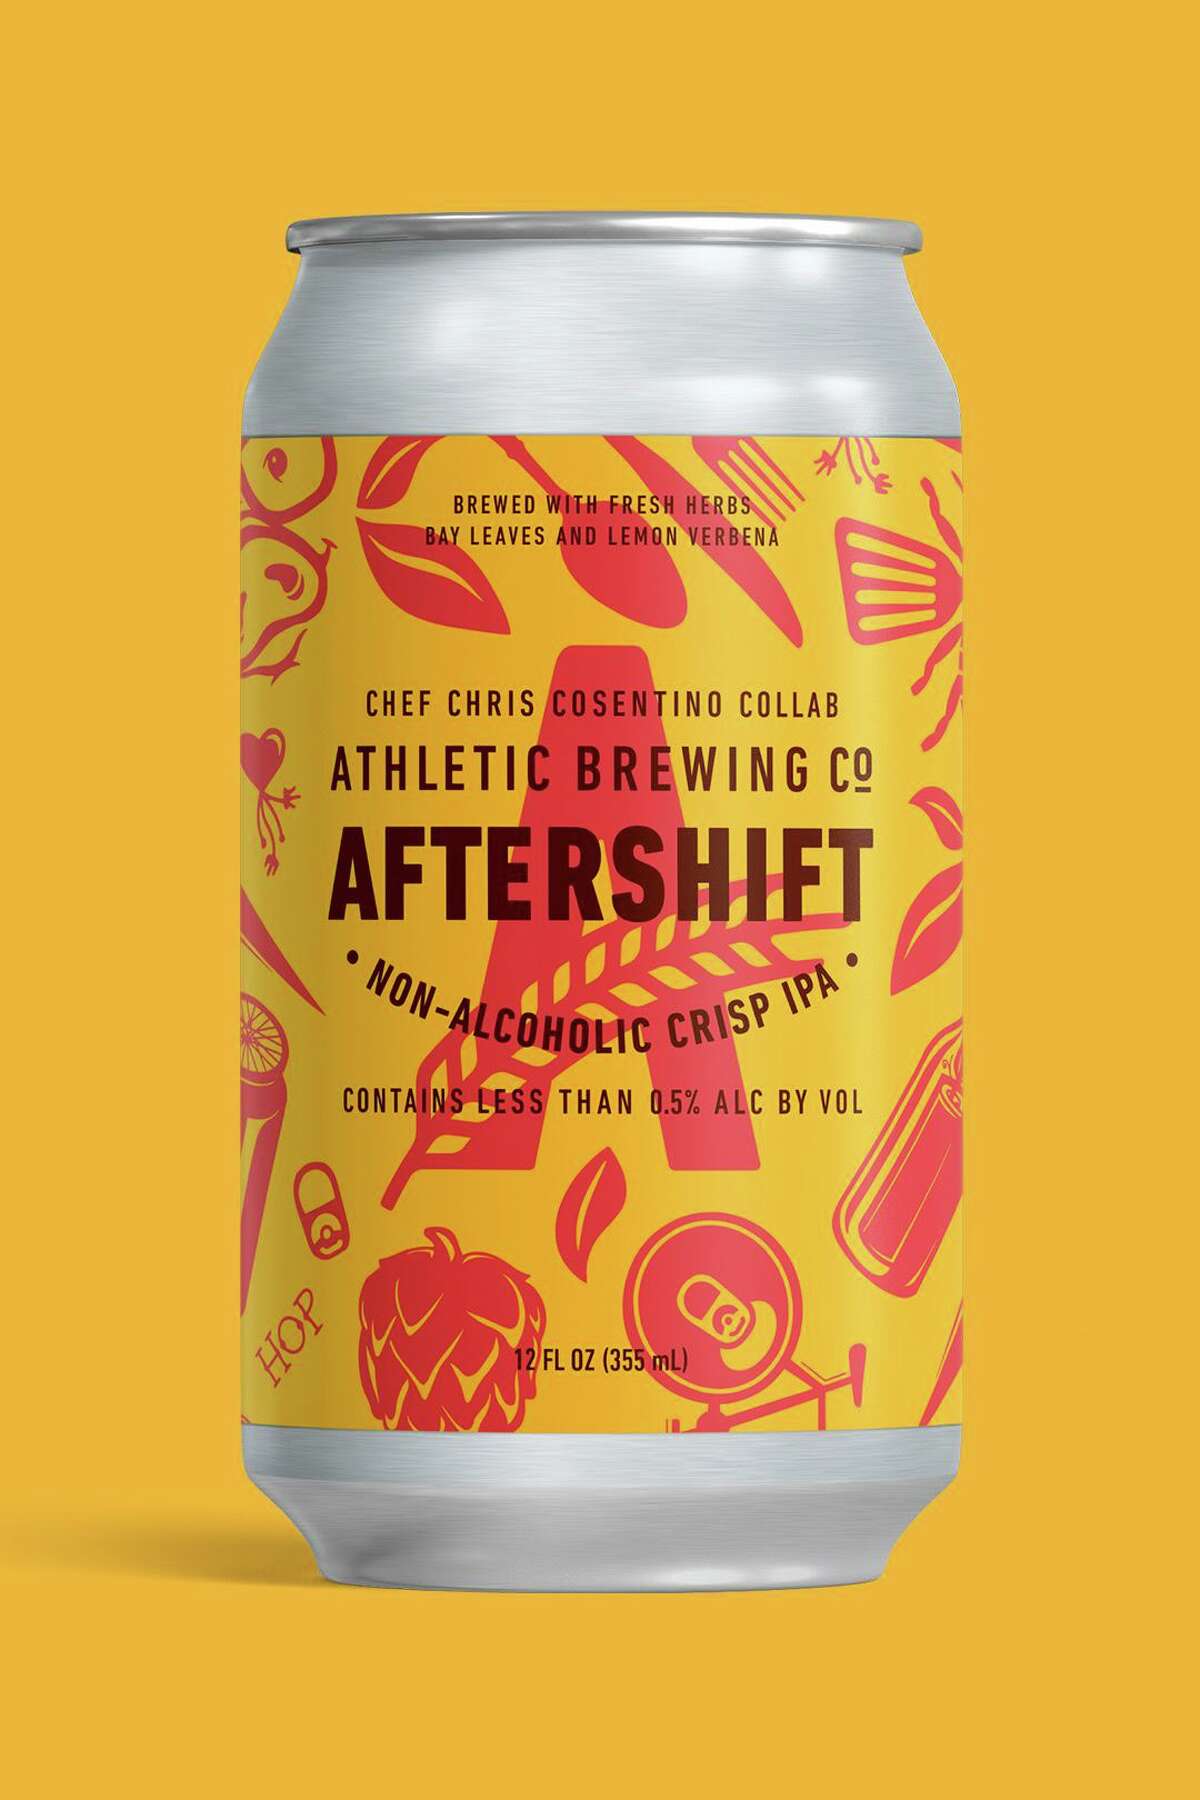 Chef Chris Cosentino collaborated with Athletic Brewing Company to launch their new nonalcoholic IPA, AfterShift.